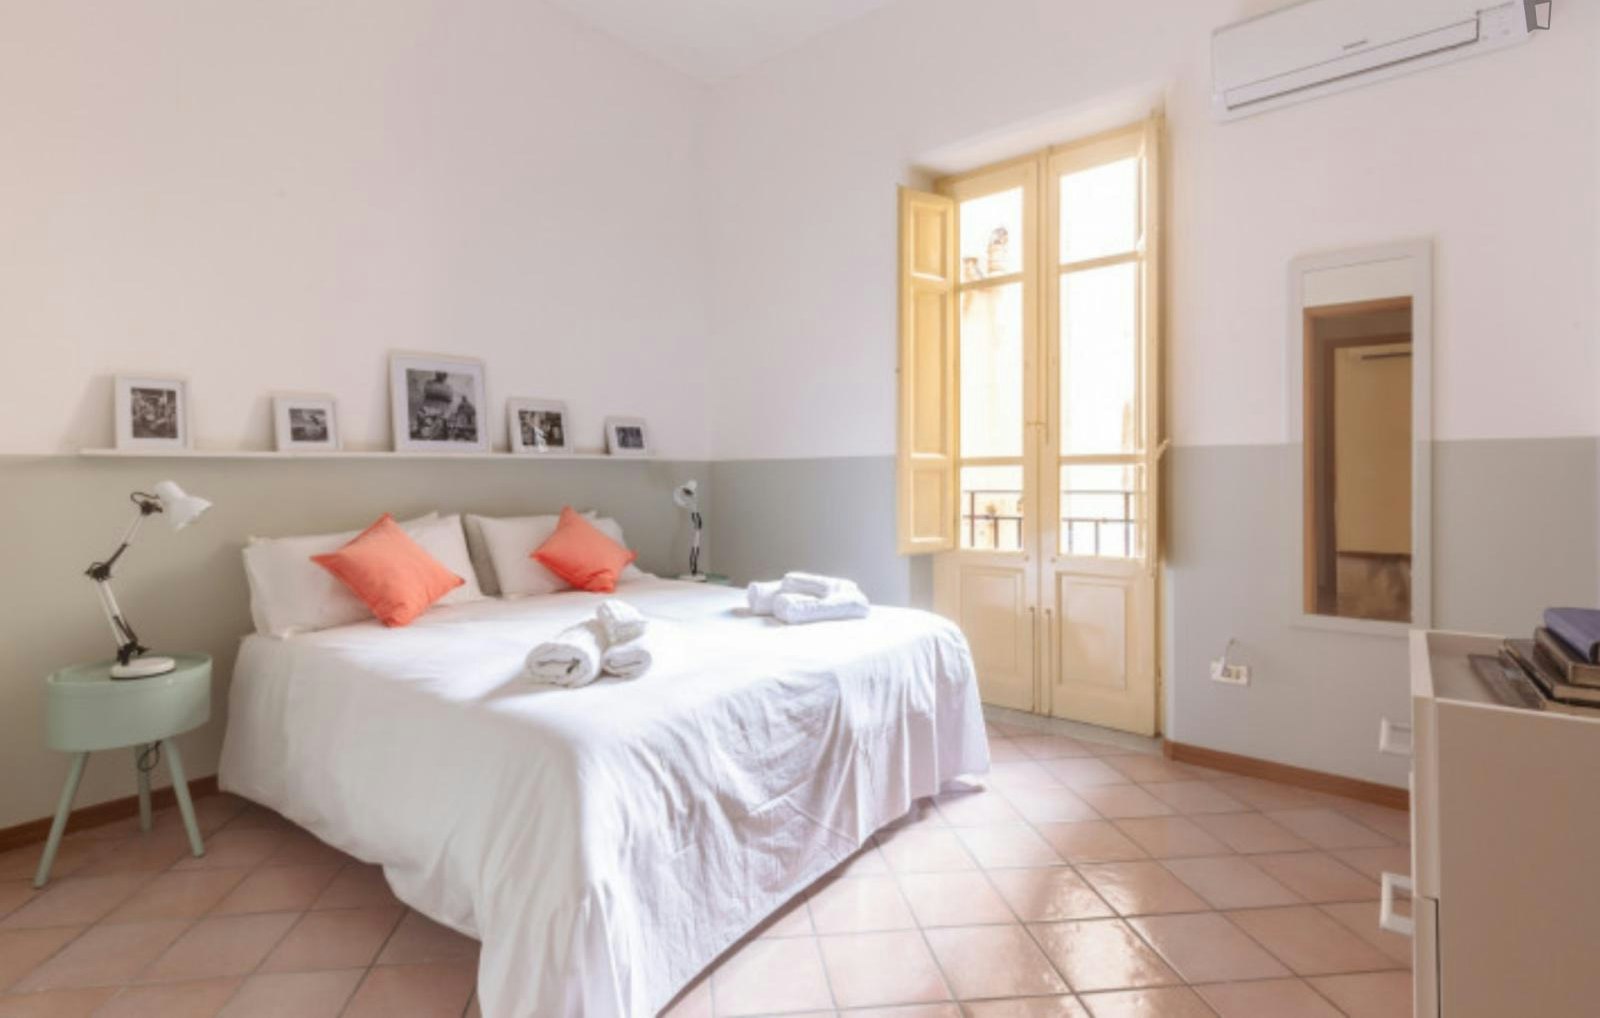 Lovely 1-bedroom apartment very close to the Piazza Politeama